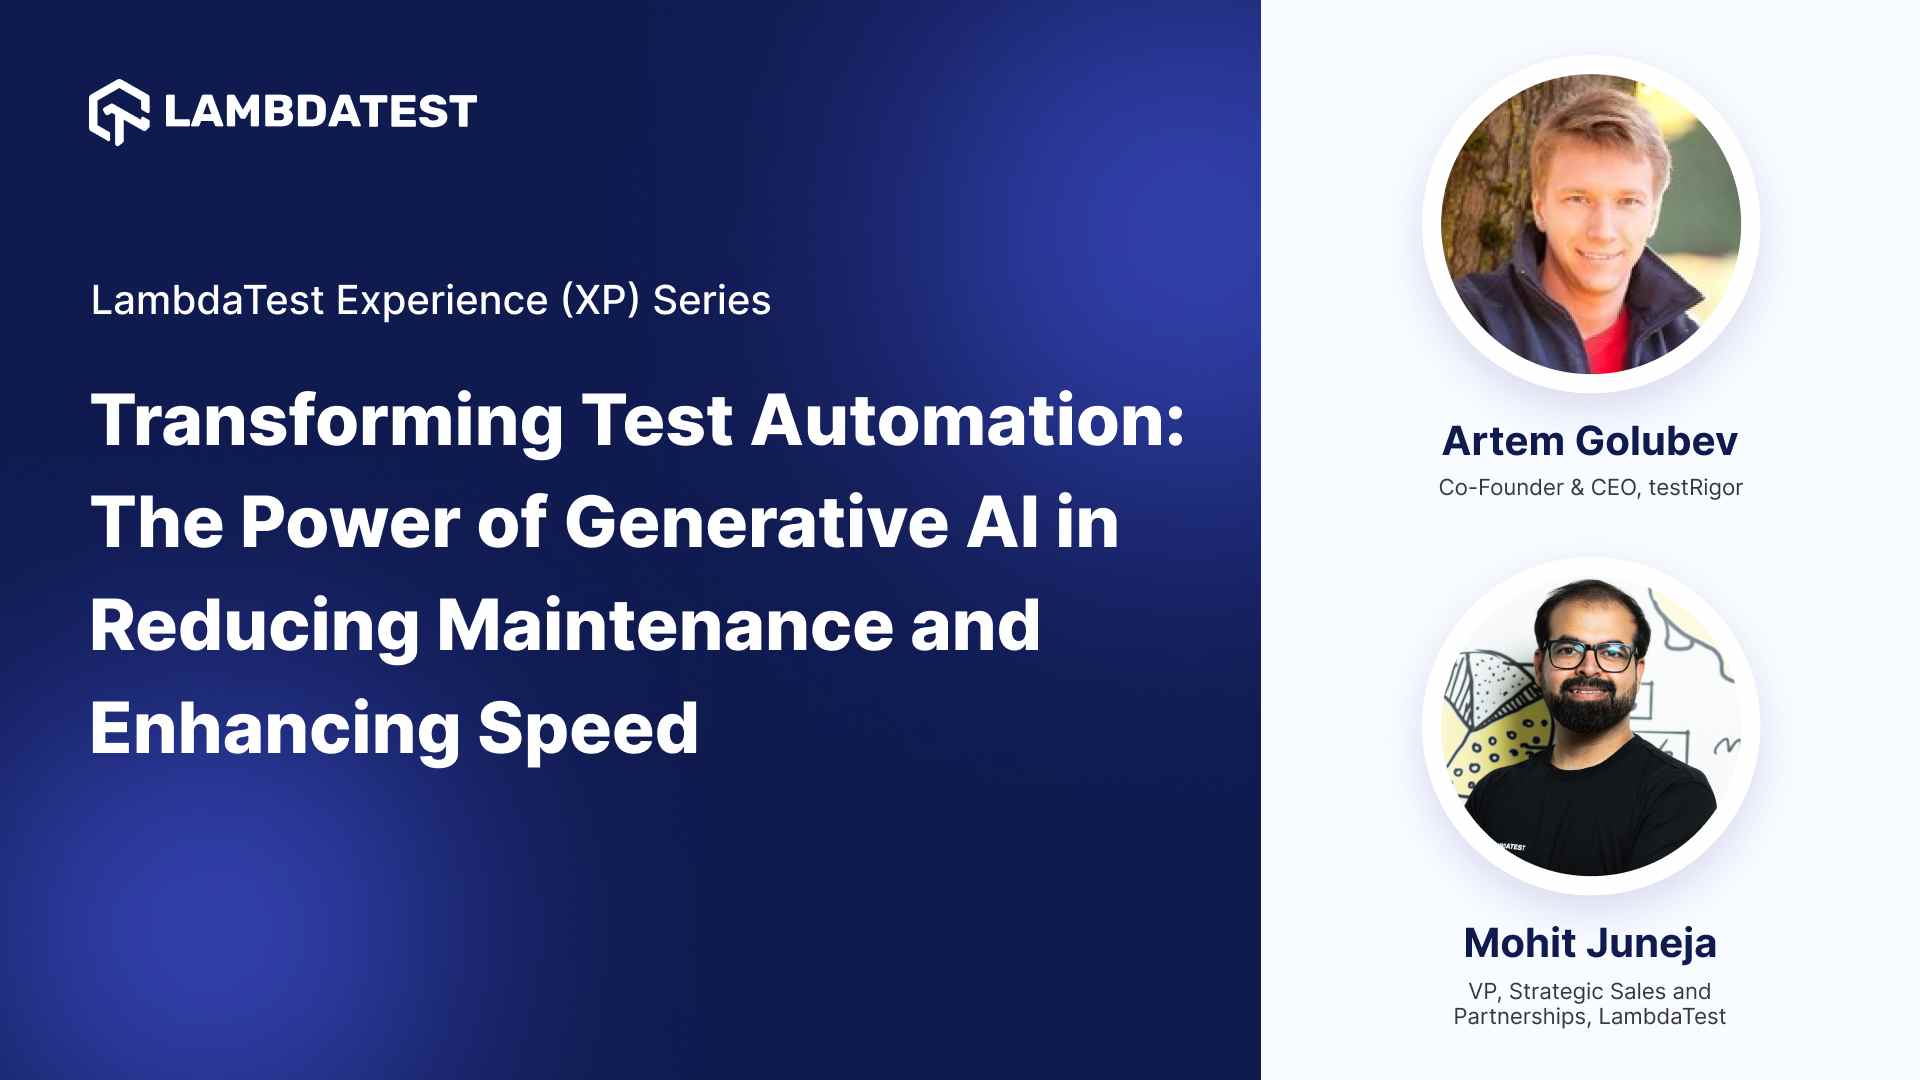 transforming-test-automation-the-power-of-generative-ai-in-reducing-maintenance-and-enhancing-speed